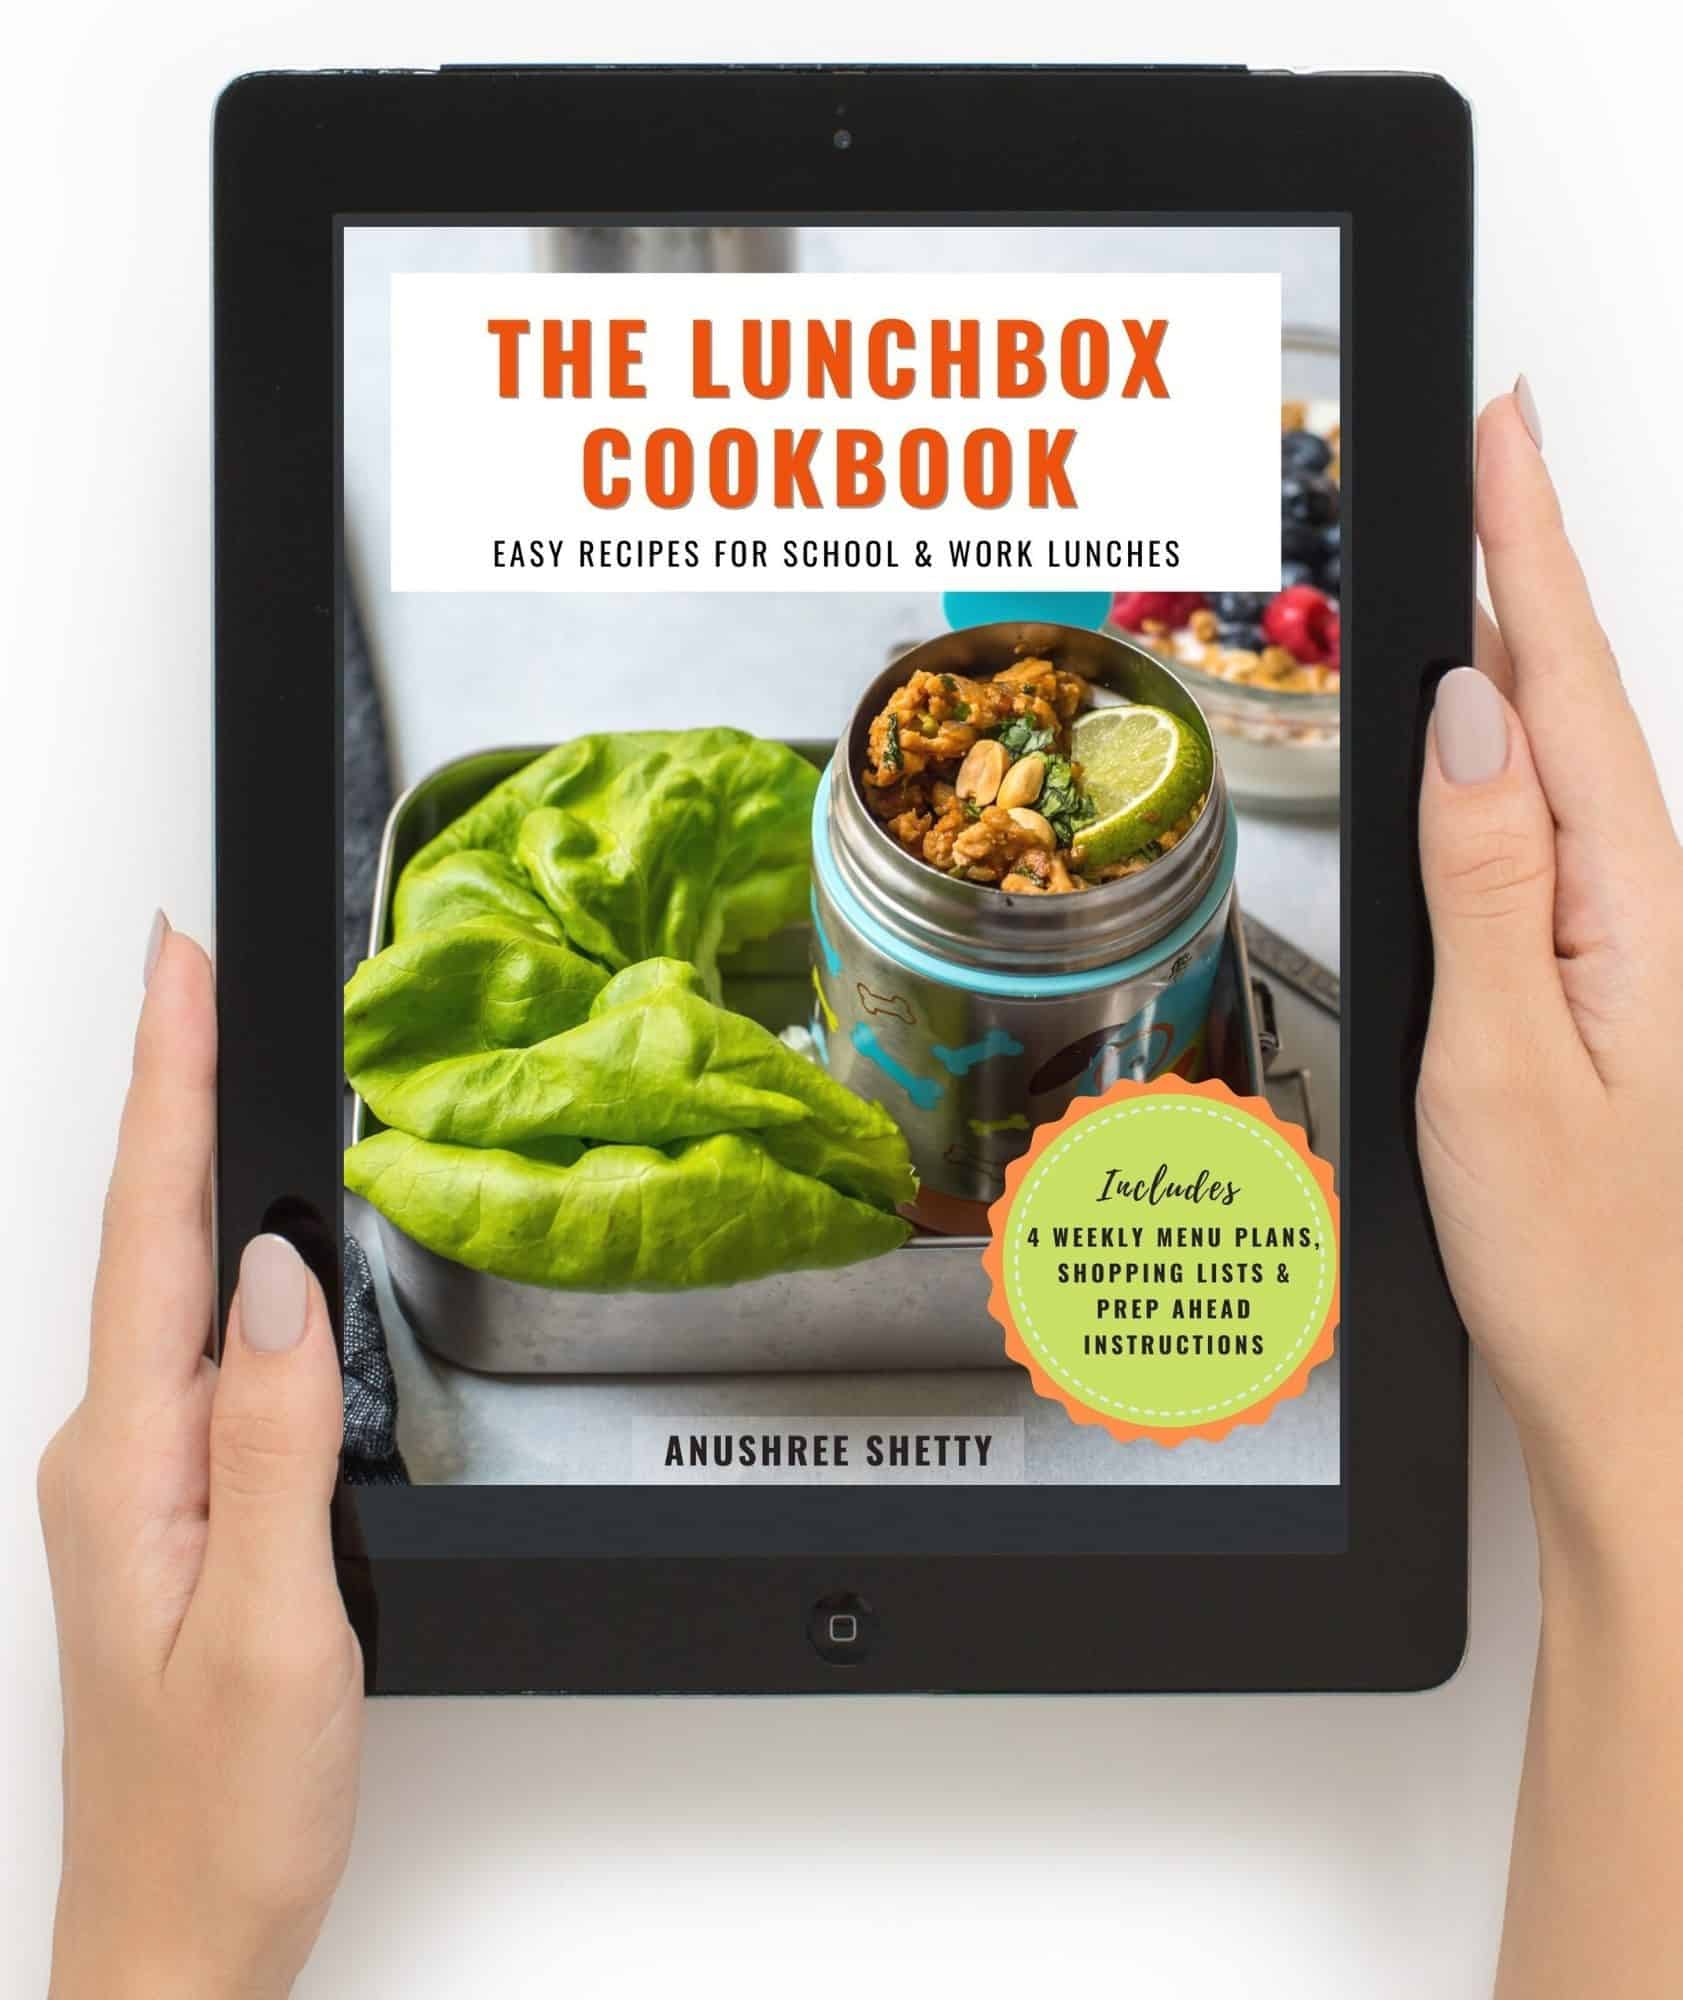 The Lunchbox cookbook eBook is opened on an iPad which is hand-held.